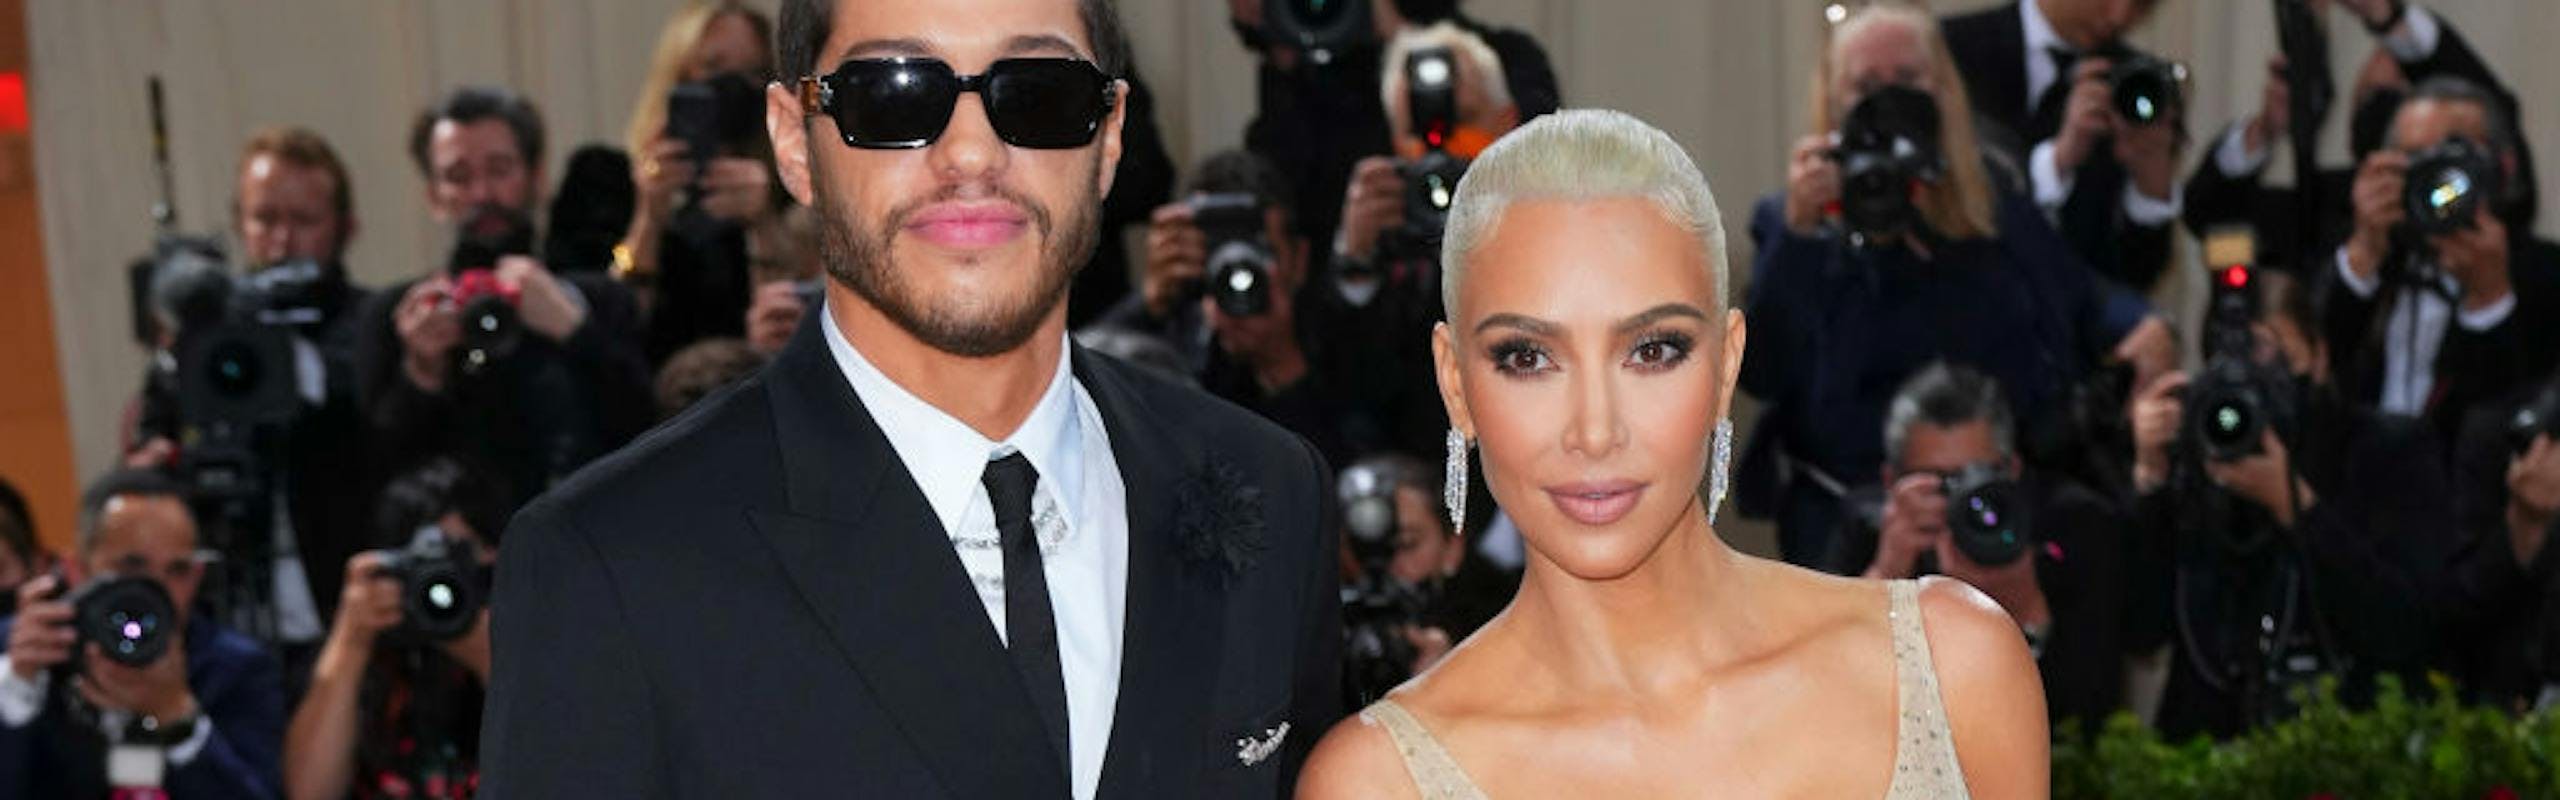 Pete Davidson in a black suit and Kim Kardashian in a sequined nude gown.